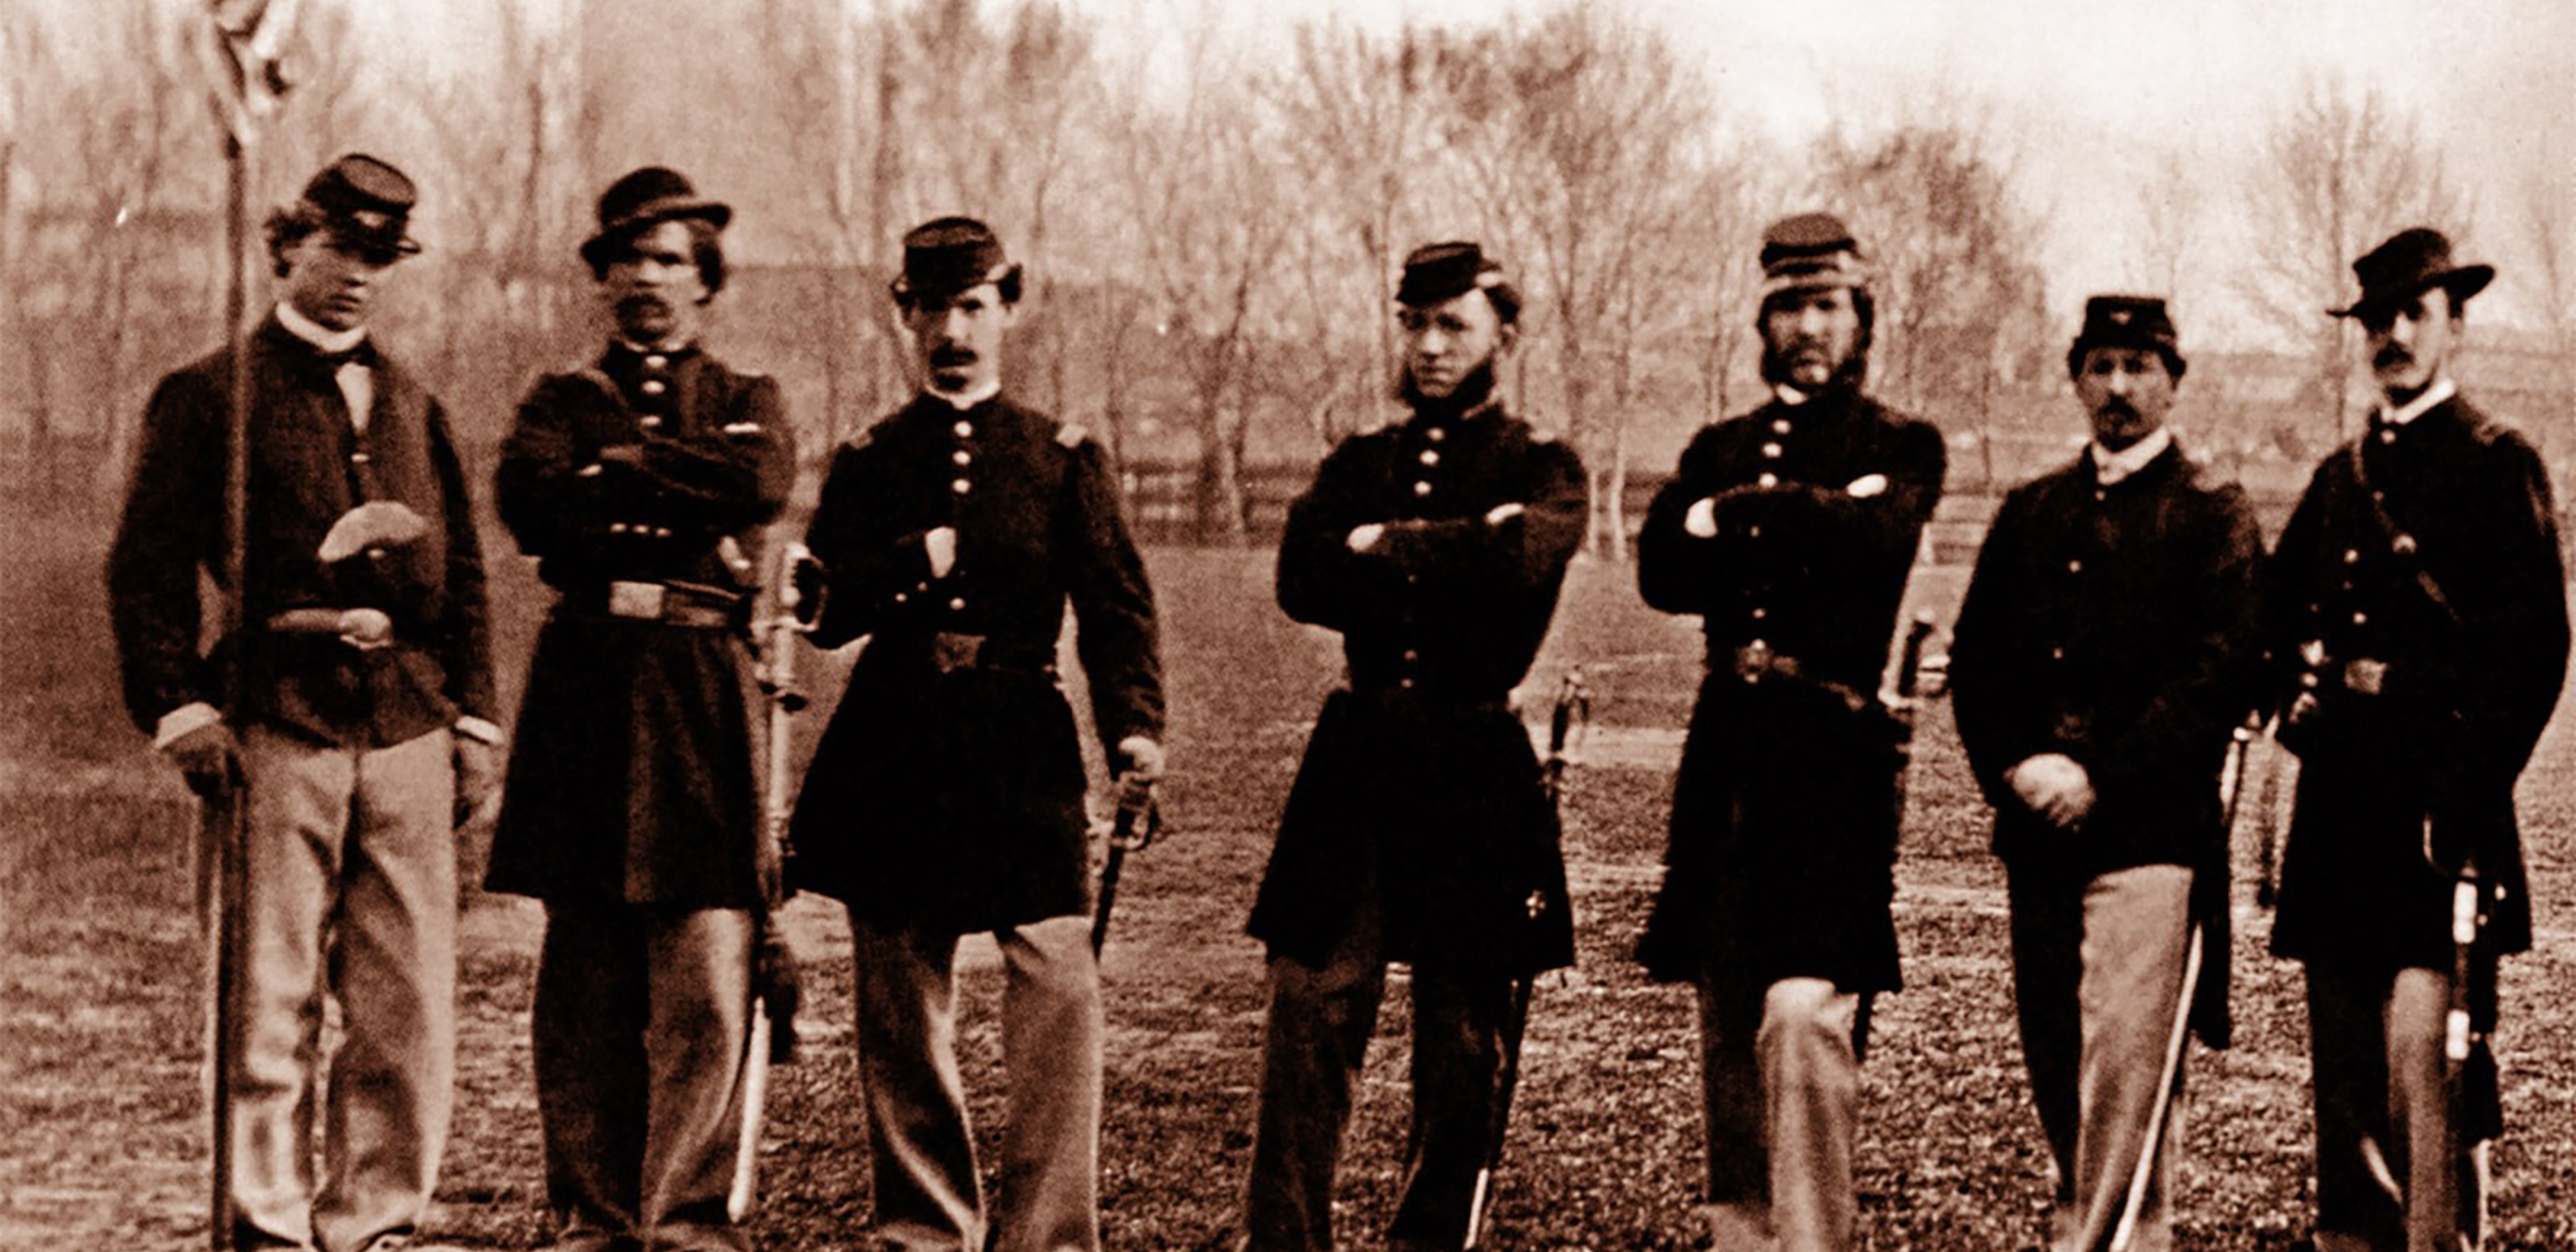 Black and white photograph of a row of men in union army uniforms standing in front of the unfinished Washington Monument.